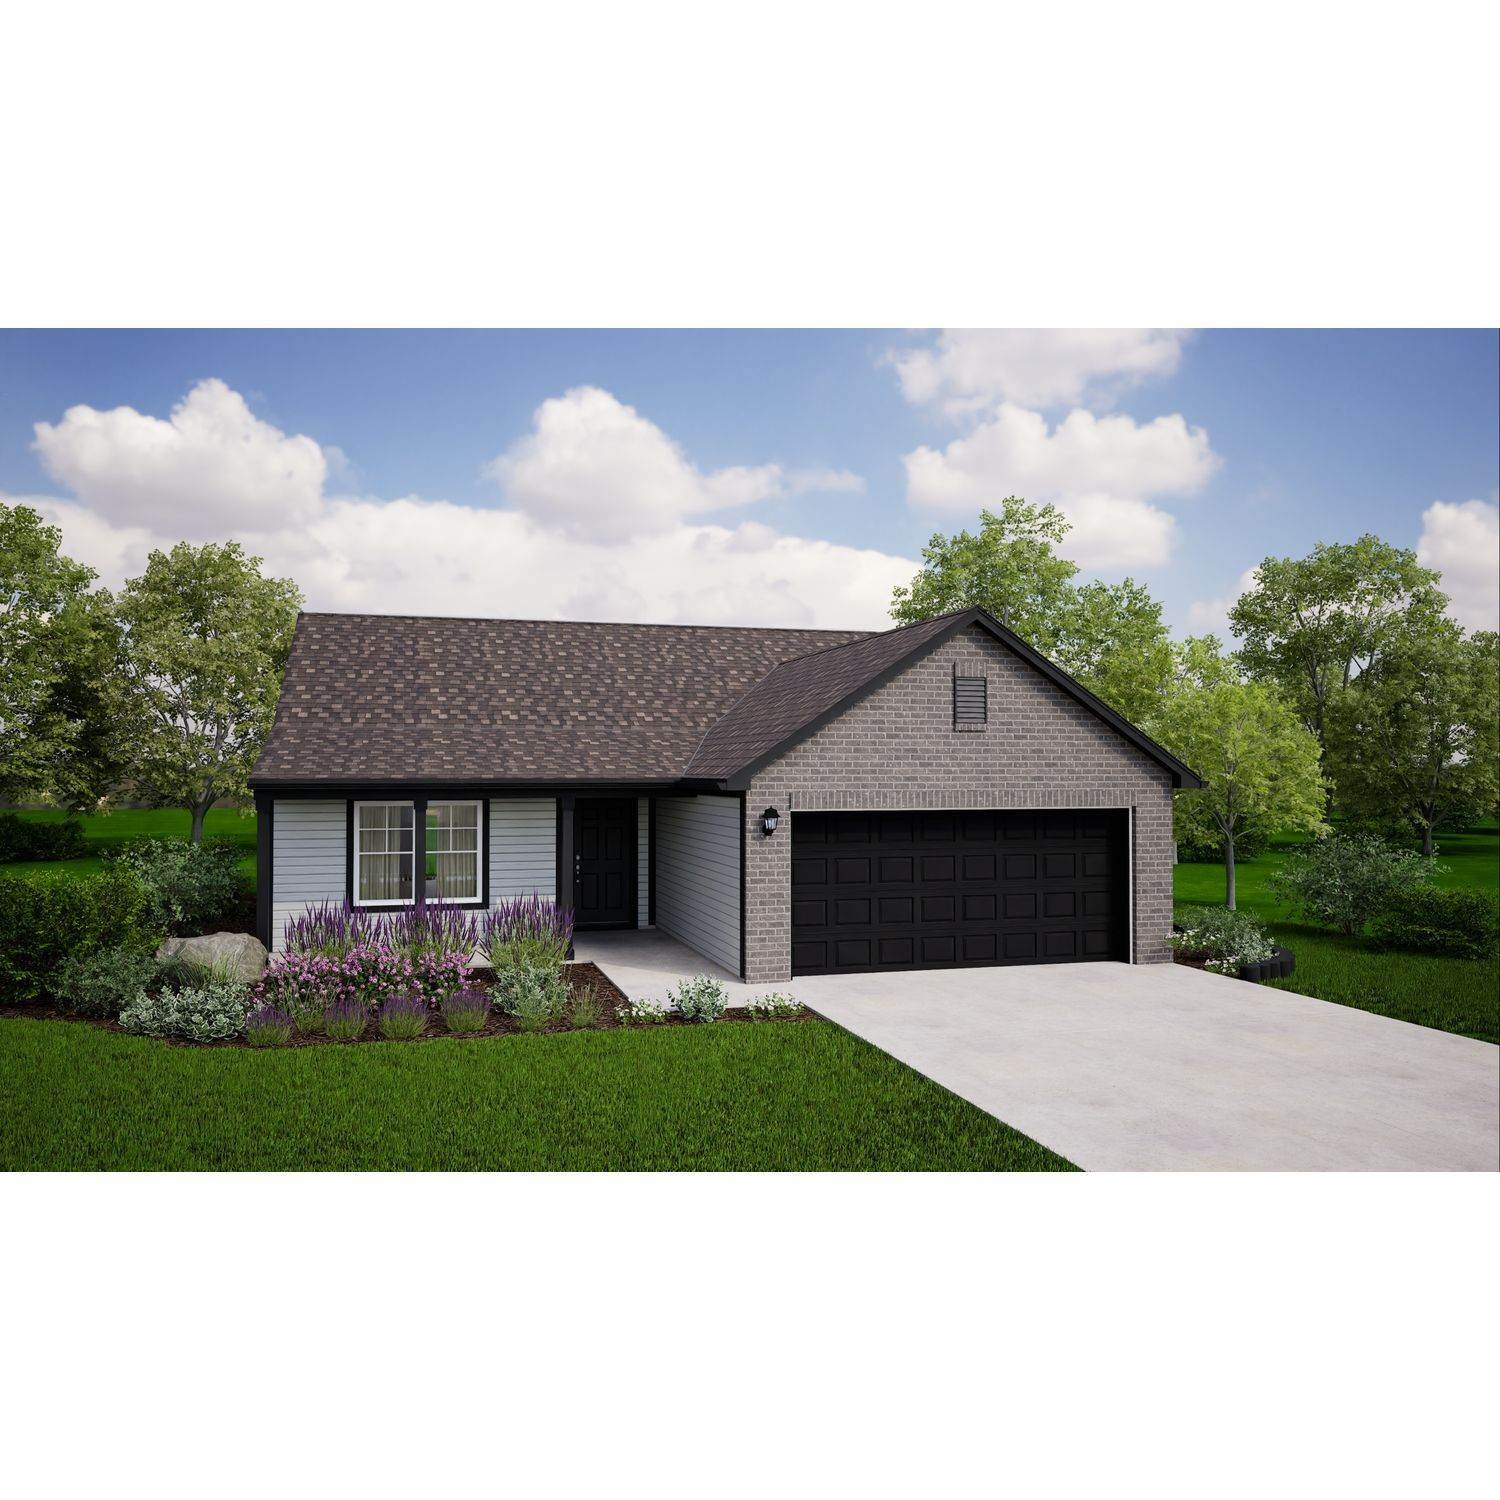 Single Family for Sale at Indianapolis, IN 46229